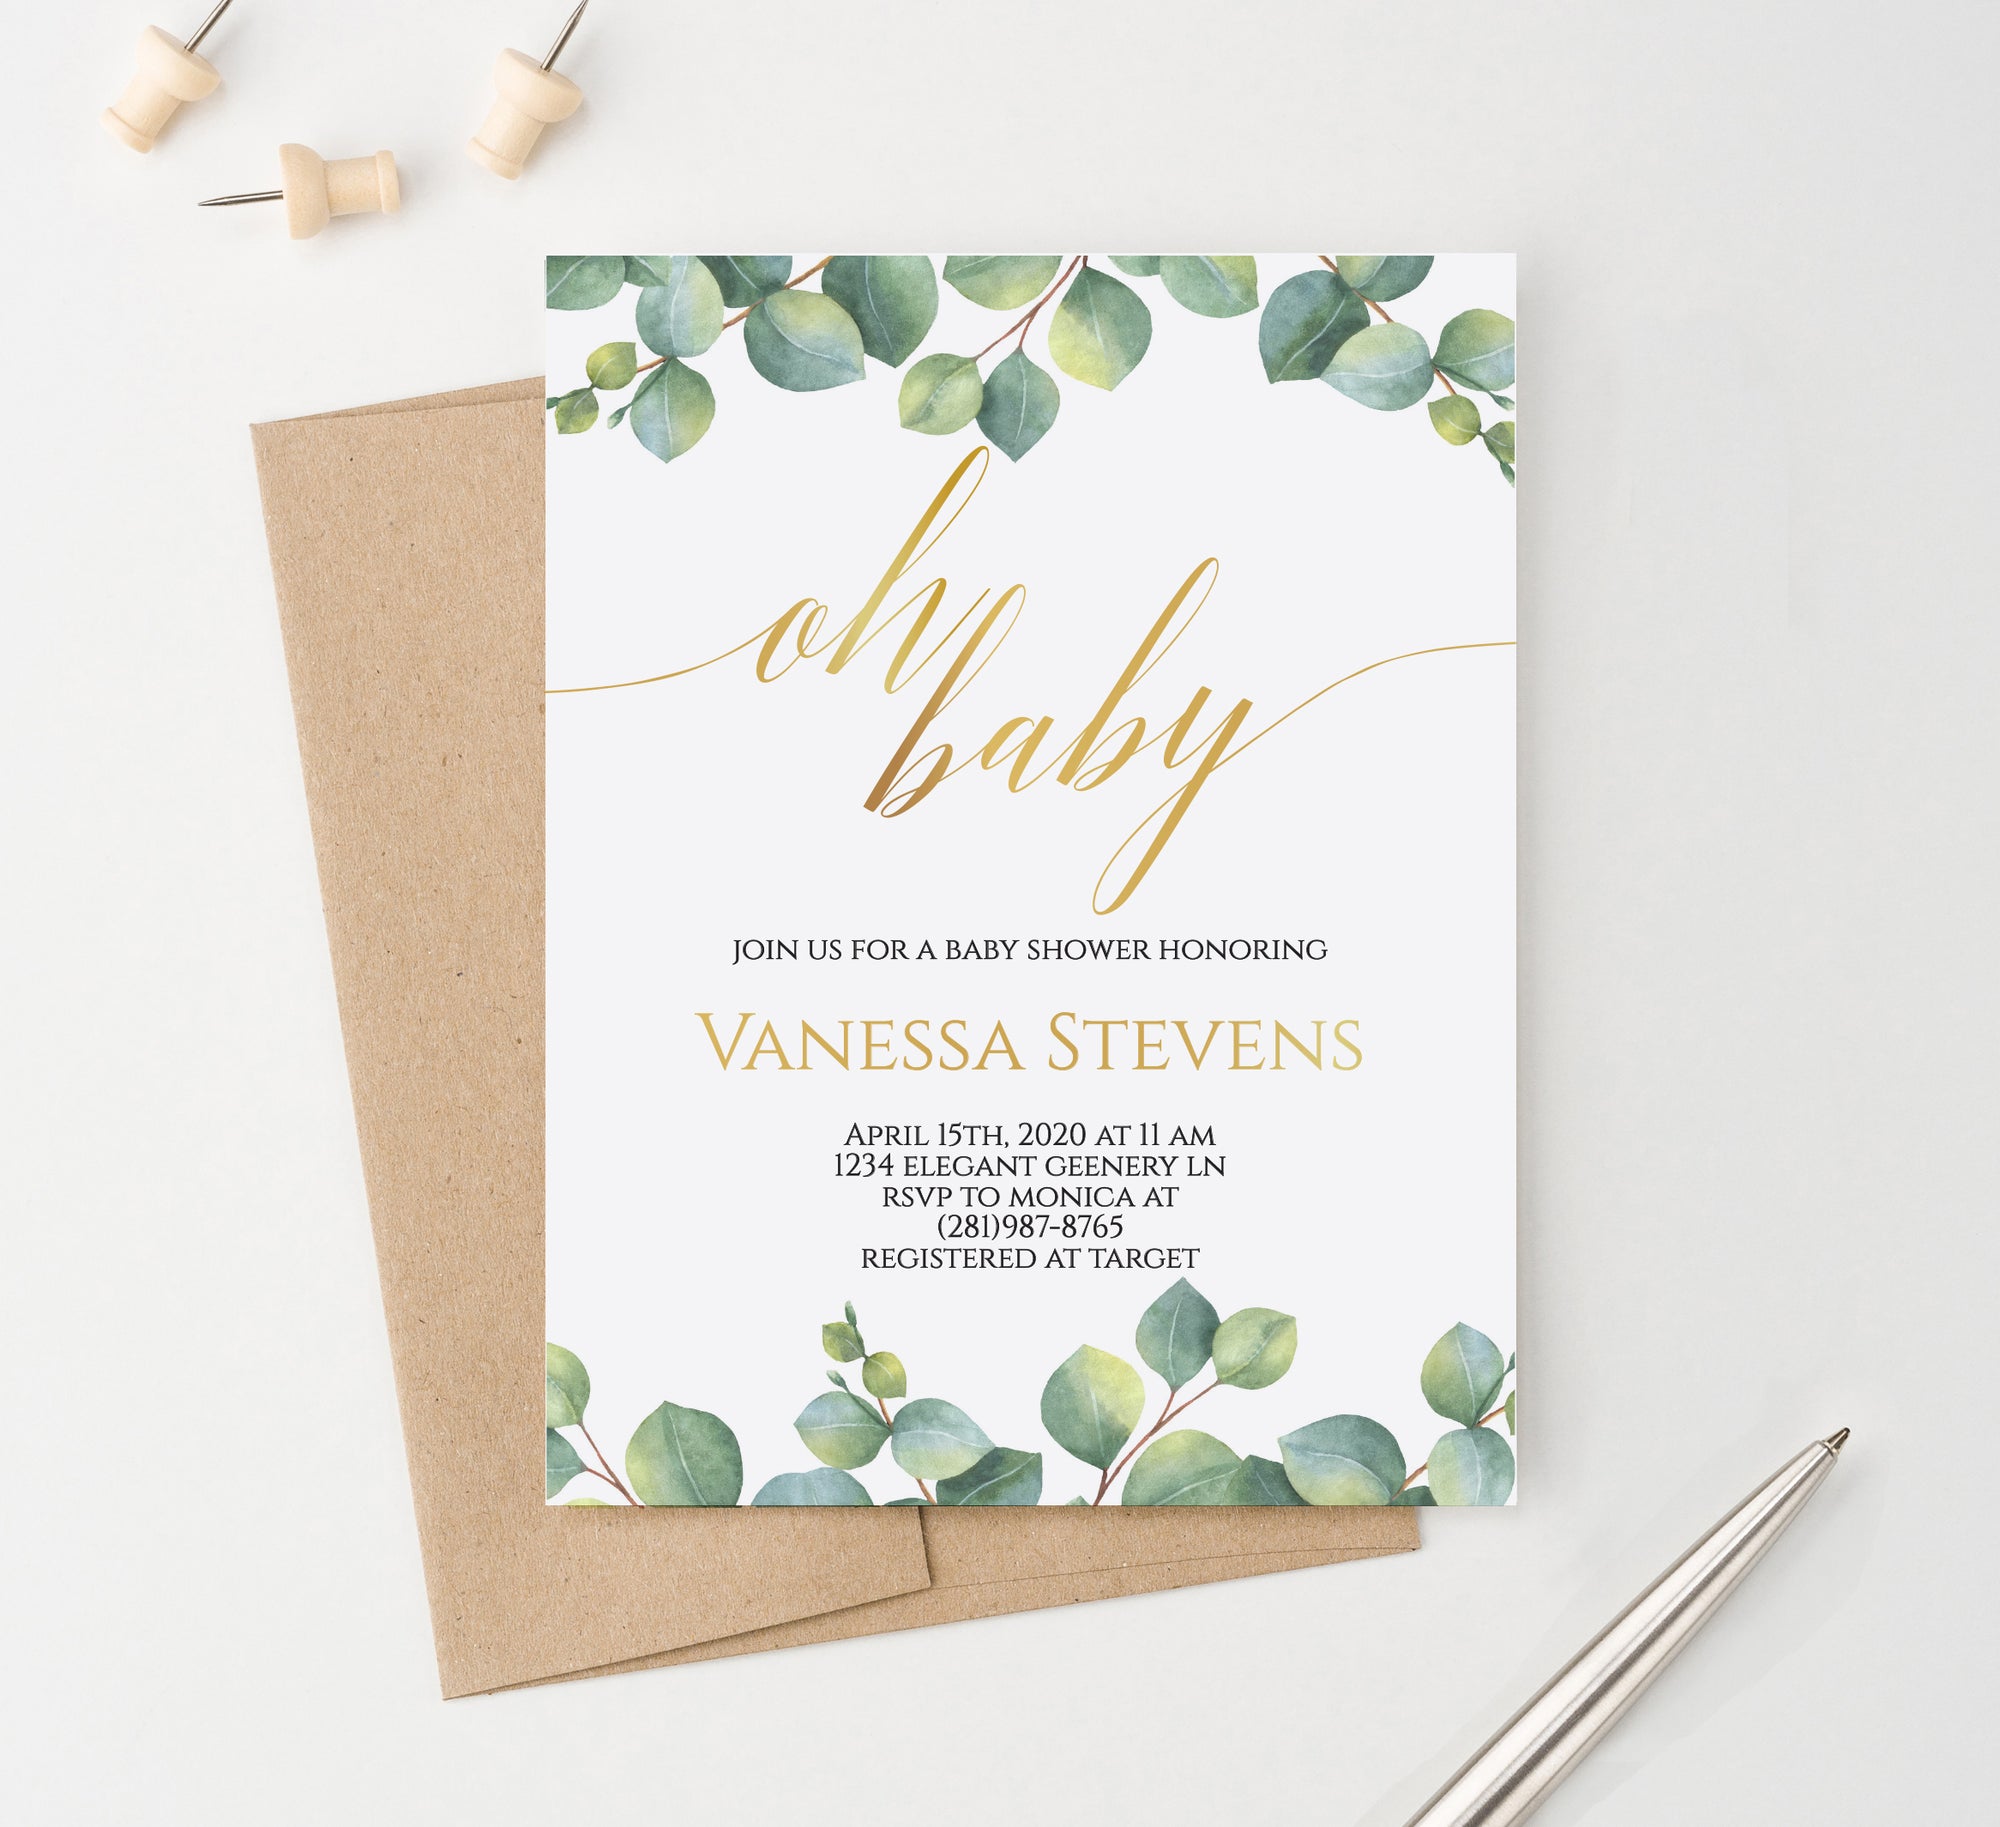 Personalized Gold Oh Baby Baby Shower Invitations With Greenery